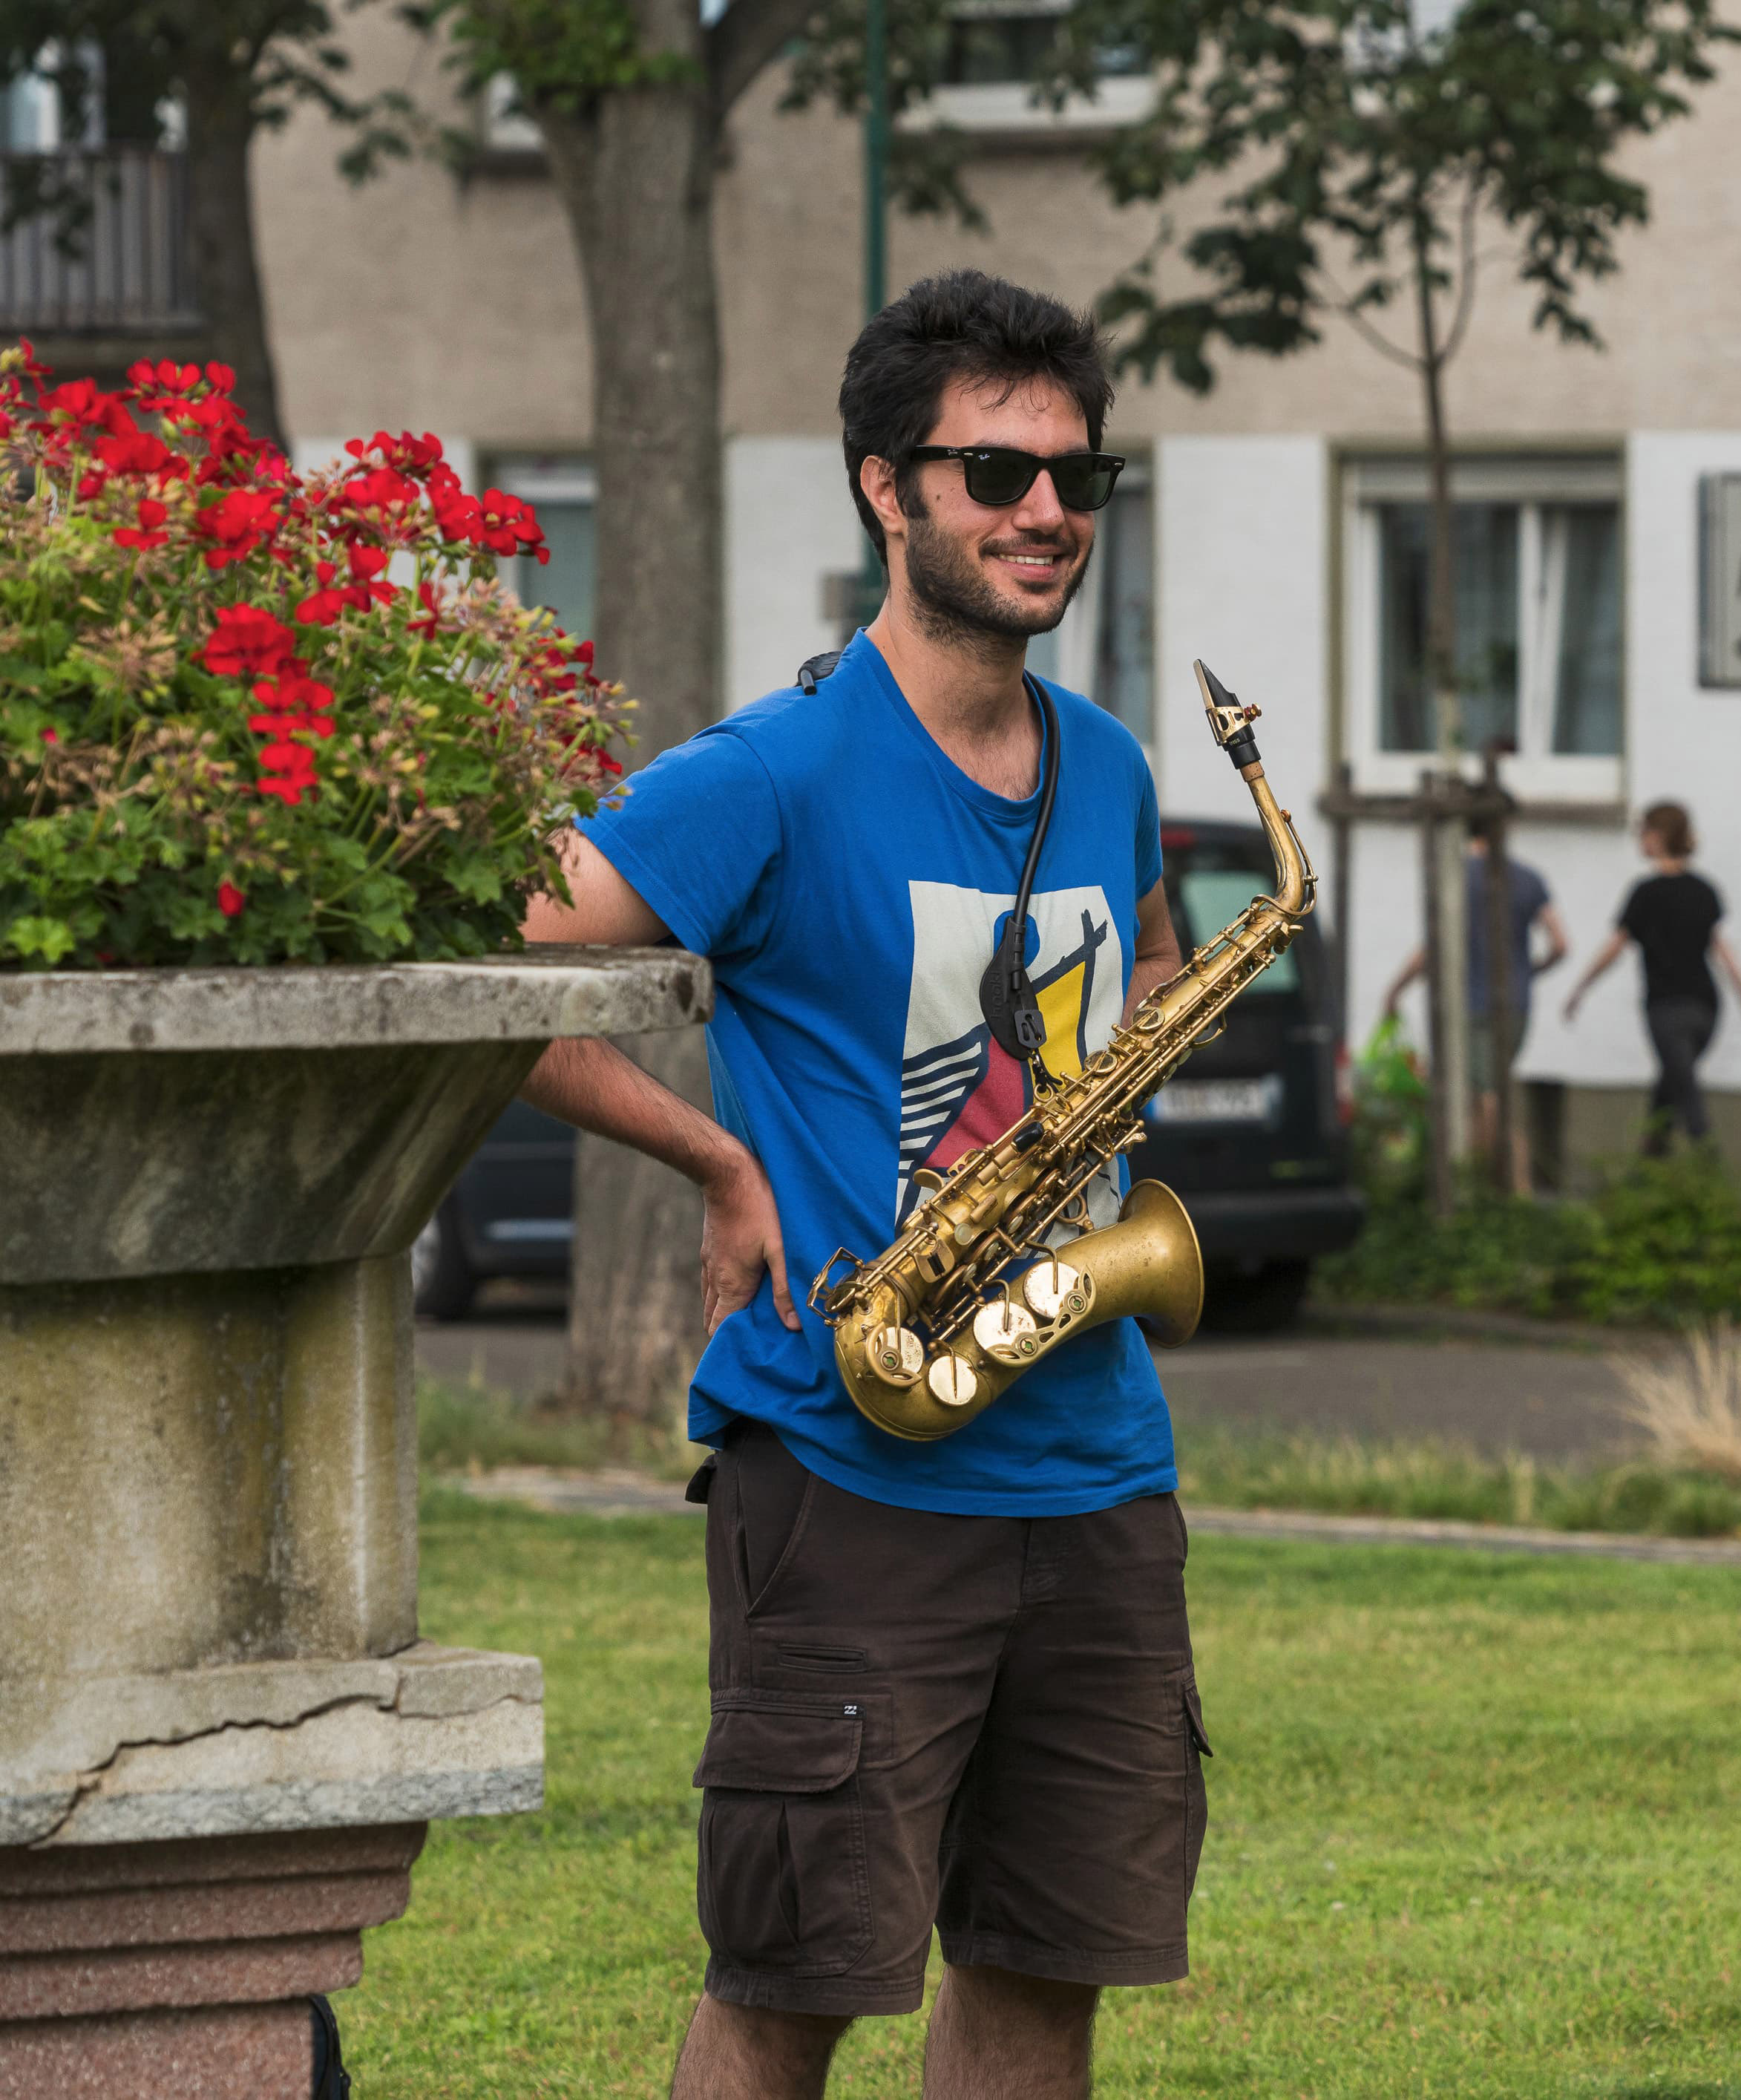 the artist holding the saxophone and wearing sunglasses